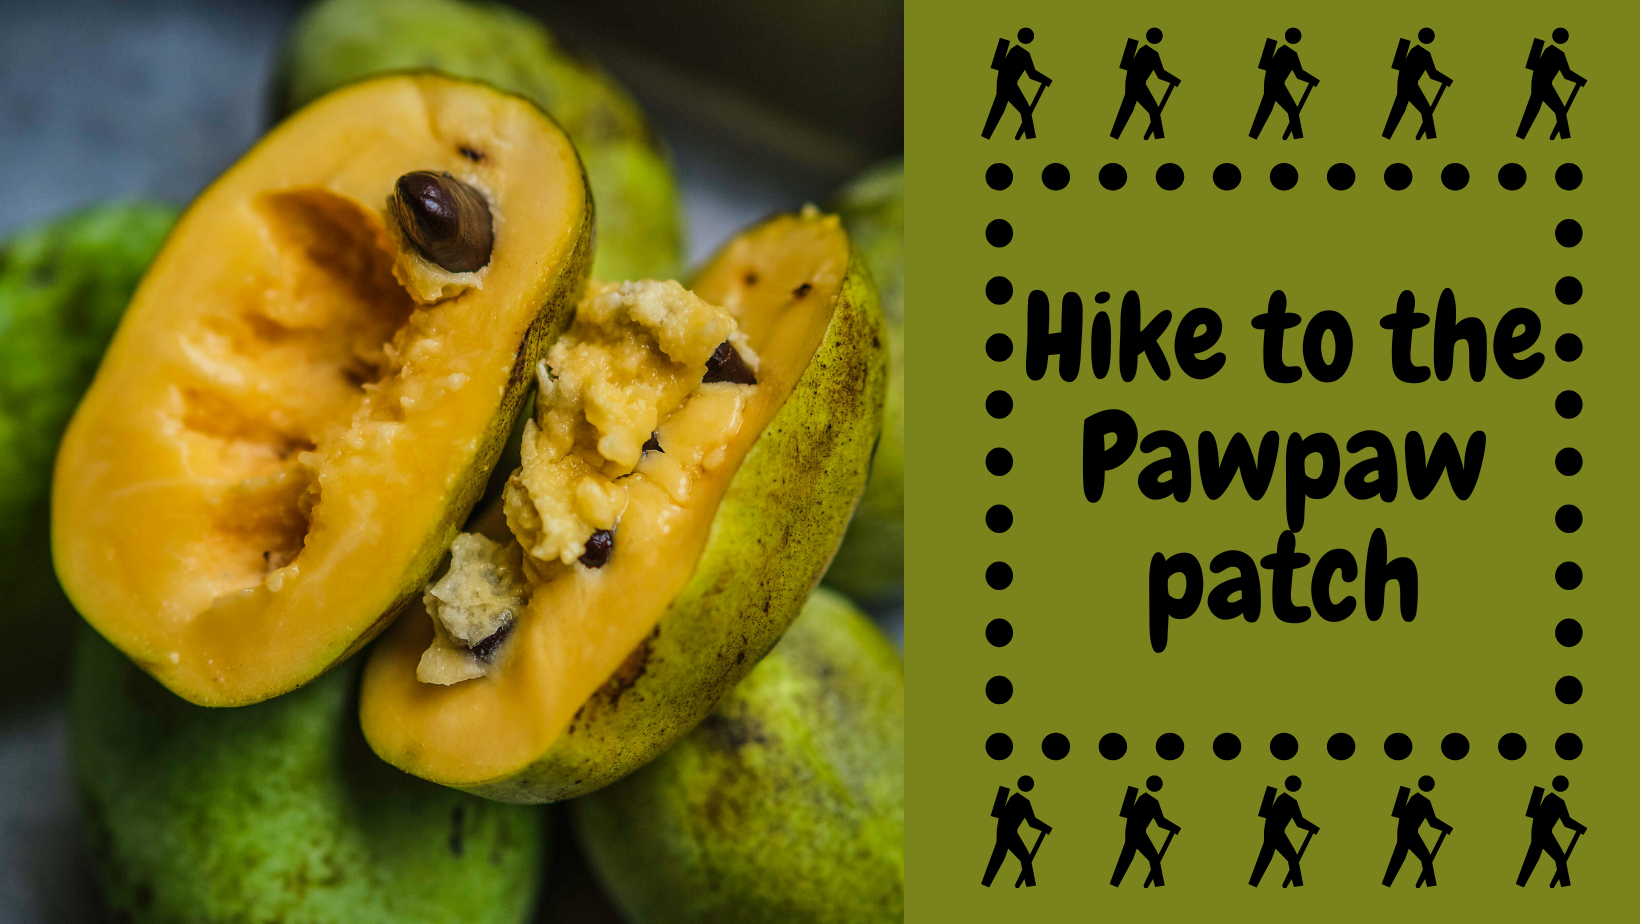 Hike to the Pawpaw Patch